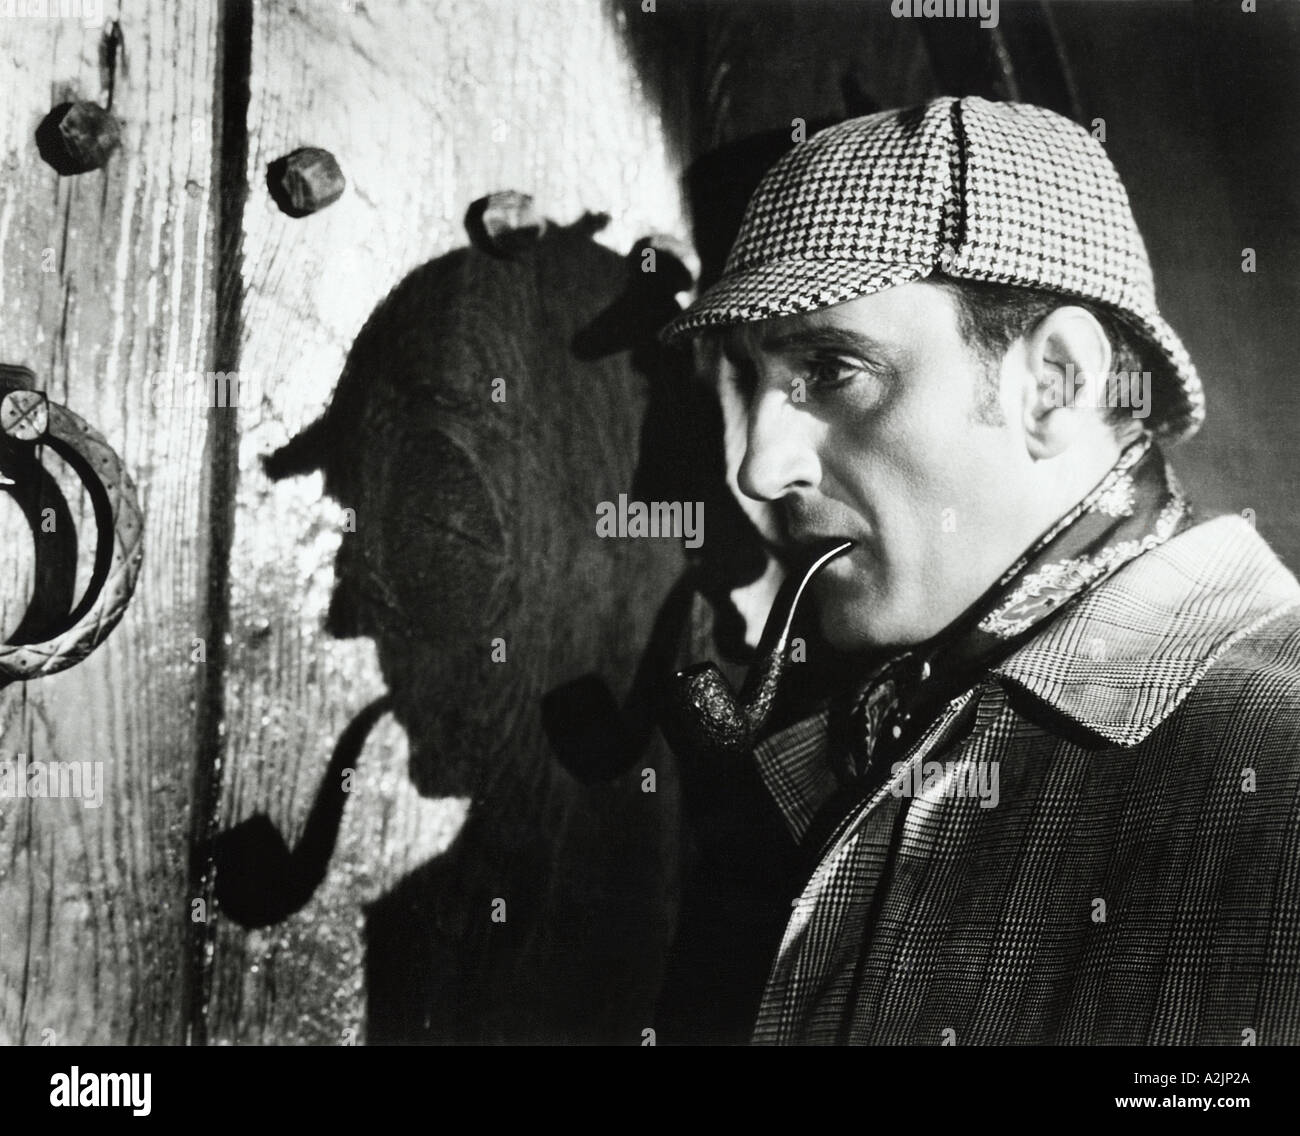 SHERLOCK HOLMES Basil Rathbone South African born actor 1892 1967 seen here in his classic film role as Sherlock Holmes Stock Photo